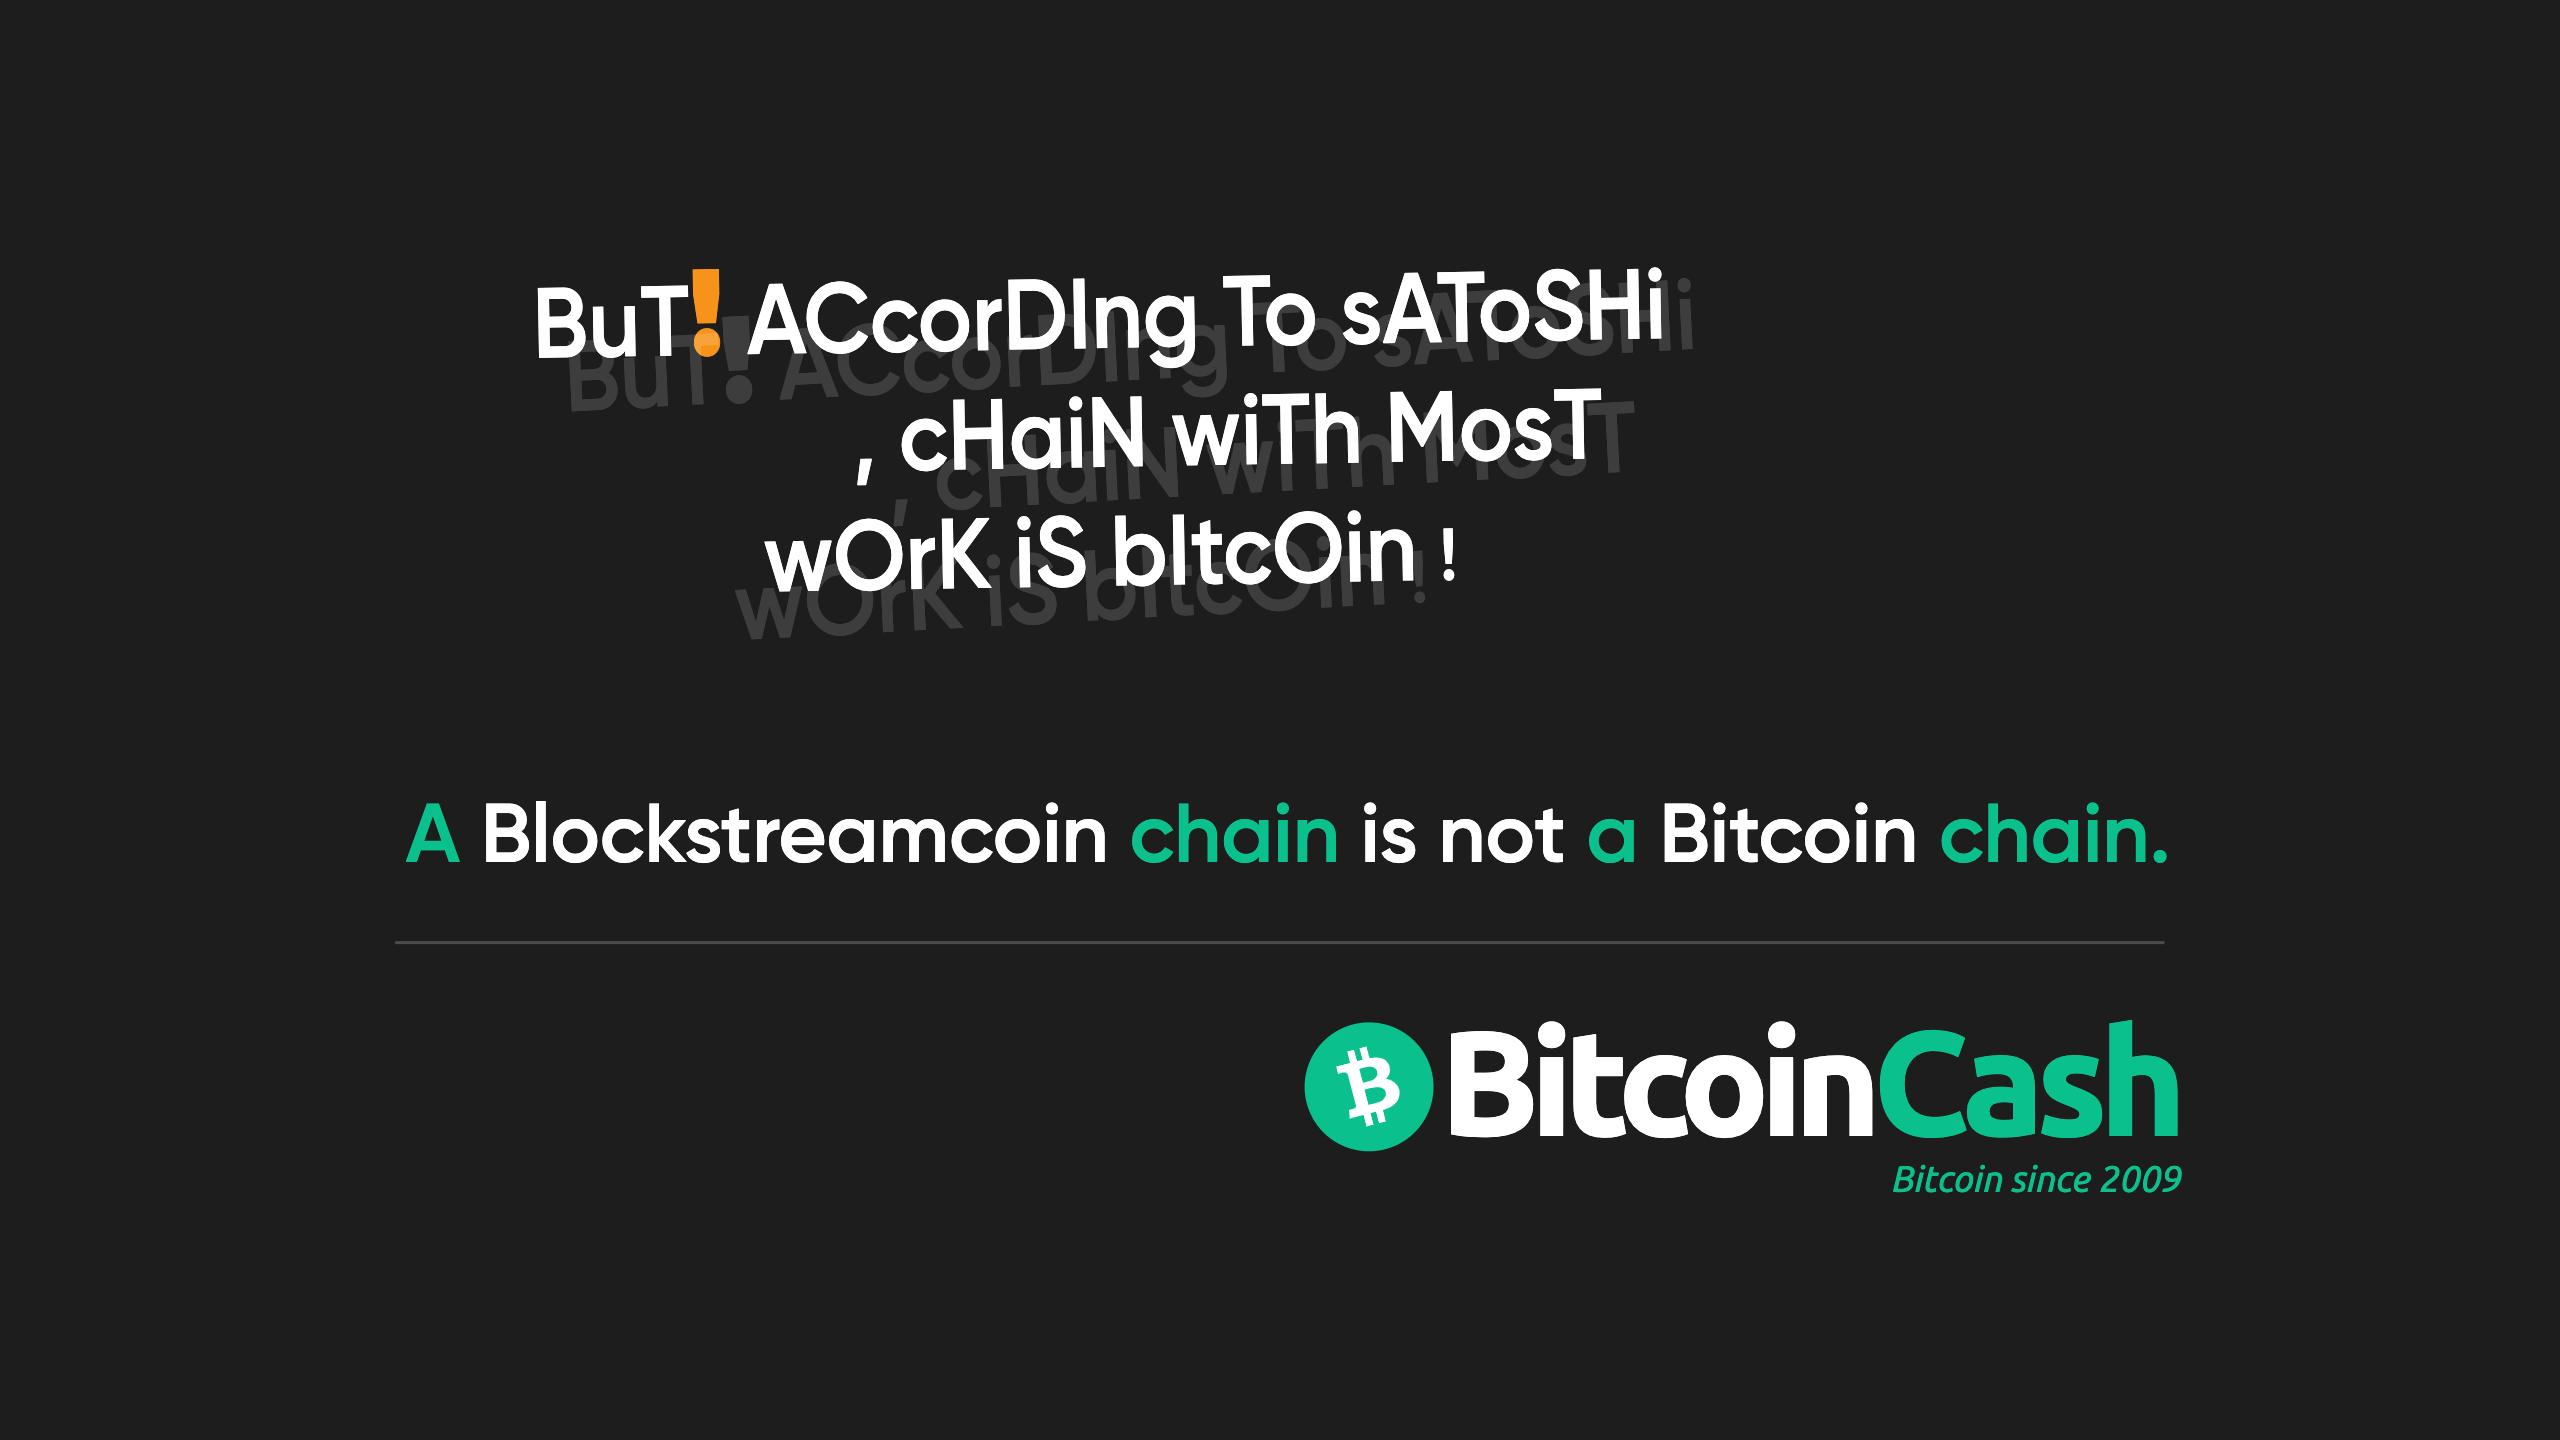 Blockstreamcoin is not Bitcoin.